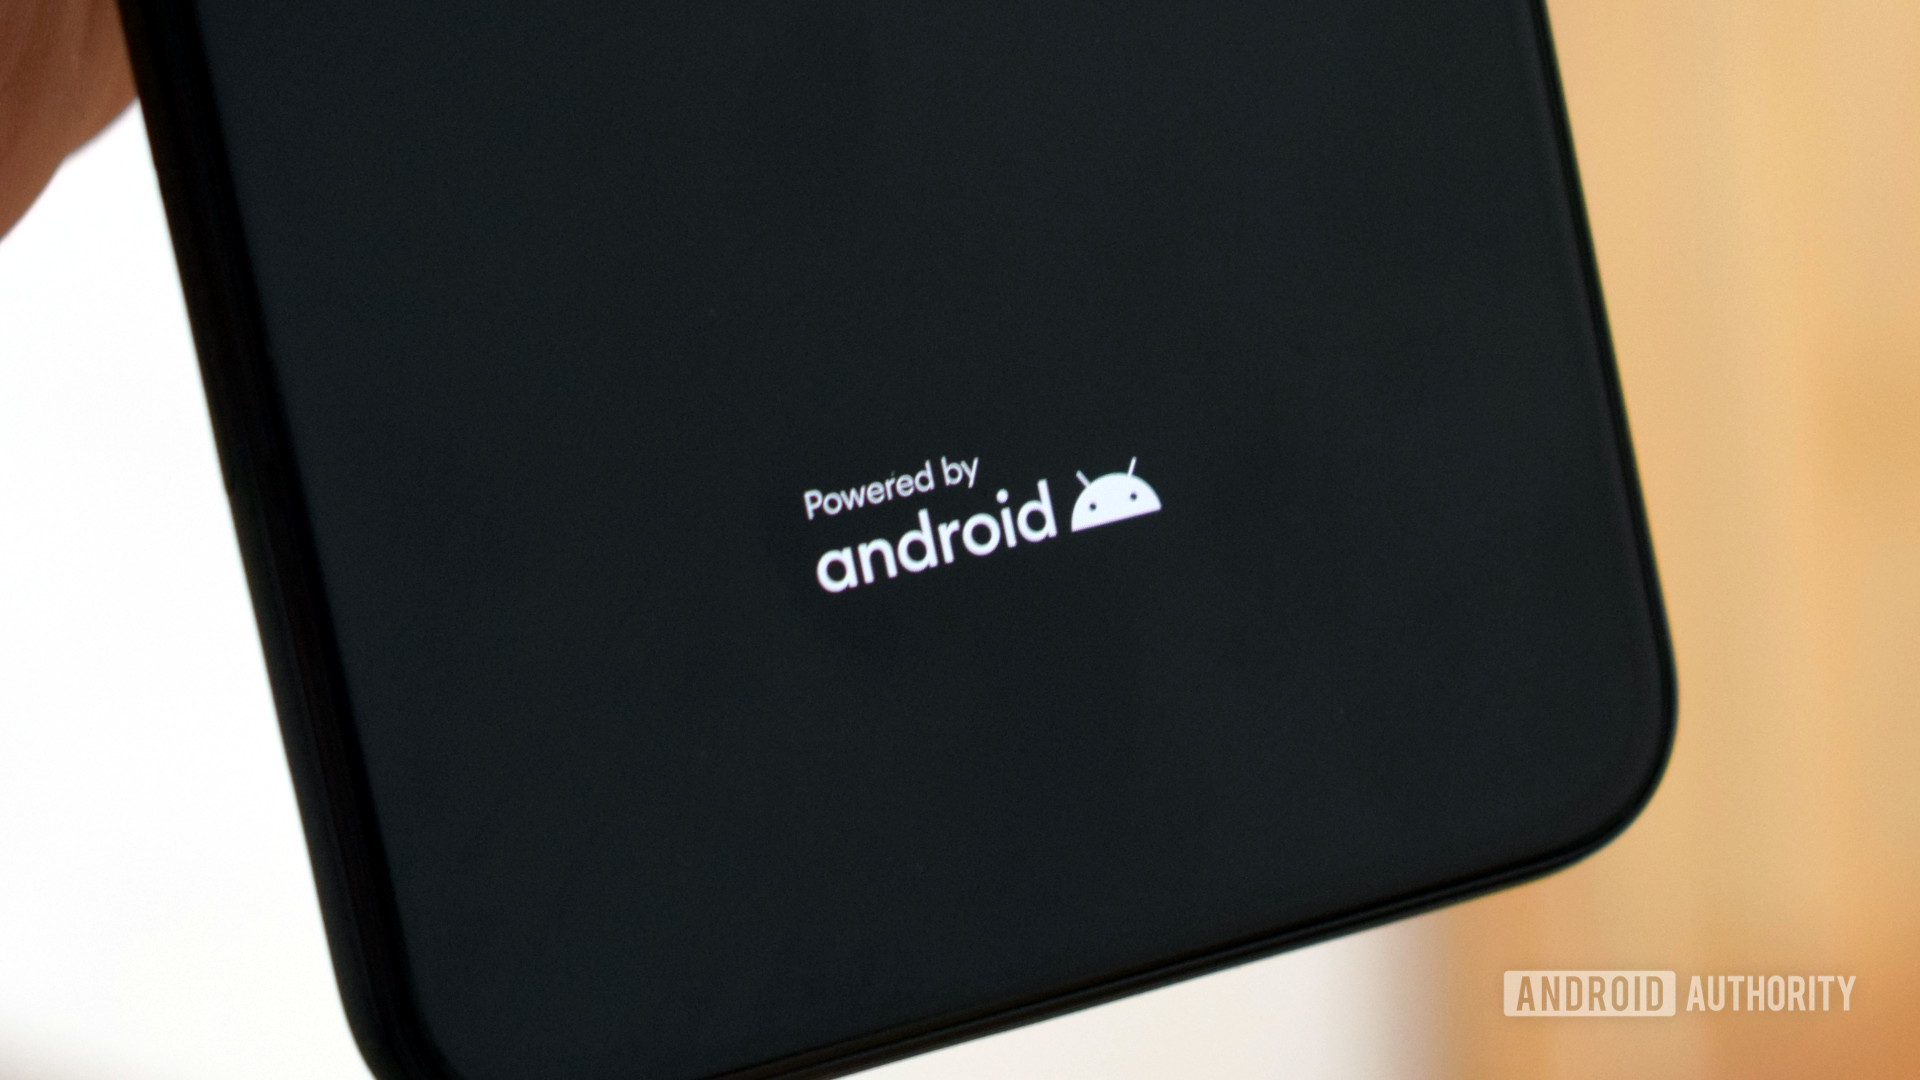 r/Android gives statement: It will extend its shutdown, but not indefinitely